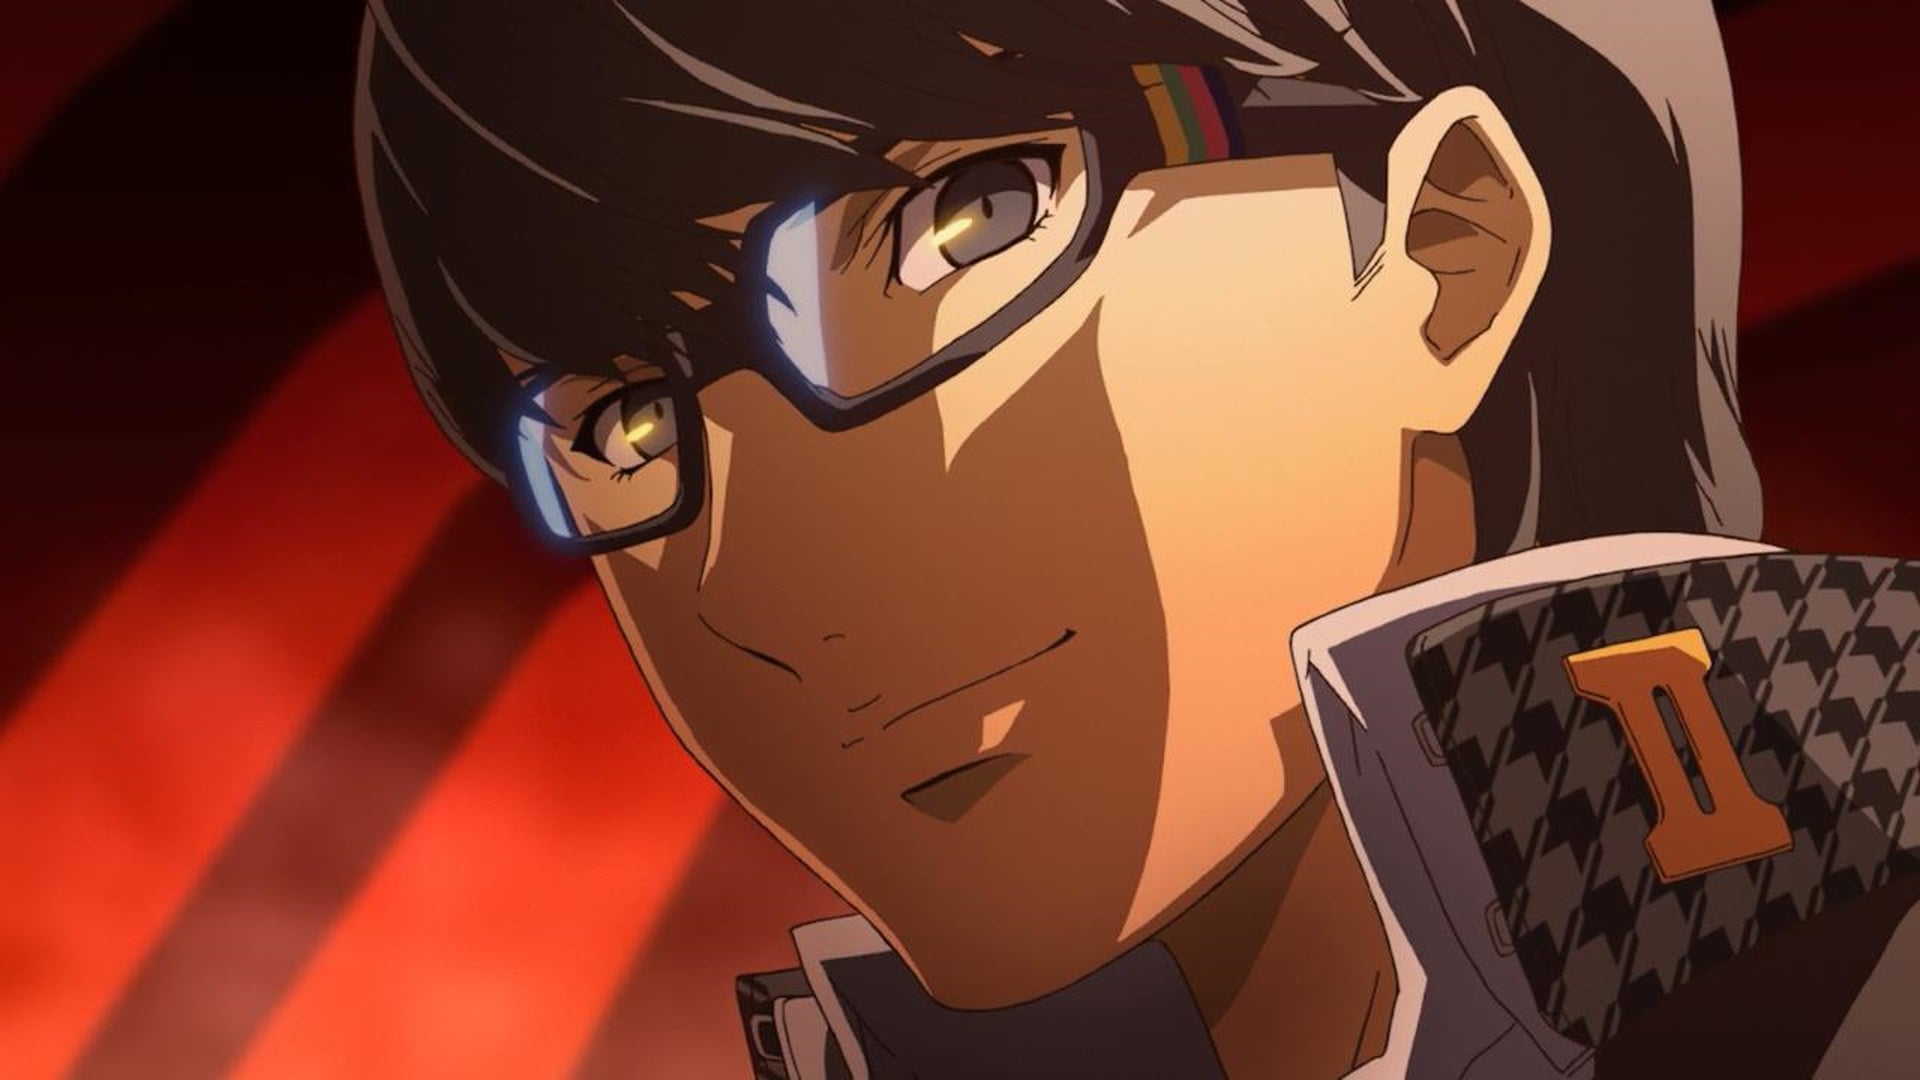 Persona 4 Golden endings: An anime young man wearing a high-collared black and white shirt and rectangular glasses is wearing an ominous smirk on his face. Behind him is a streaked red background